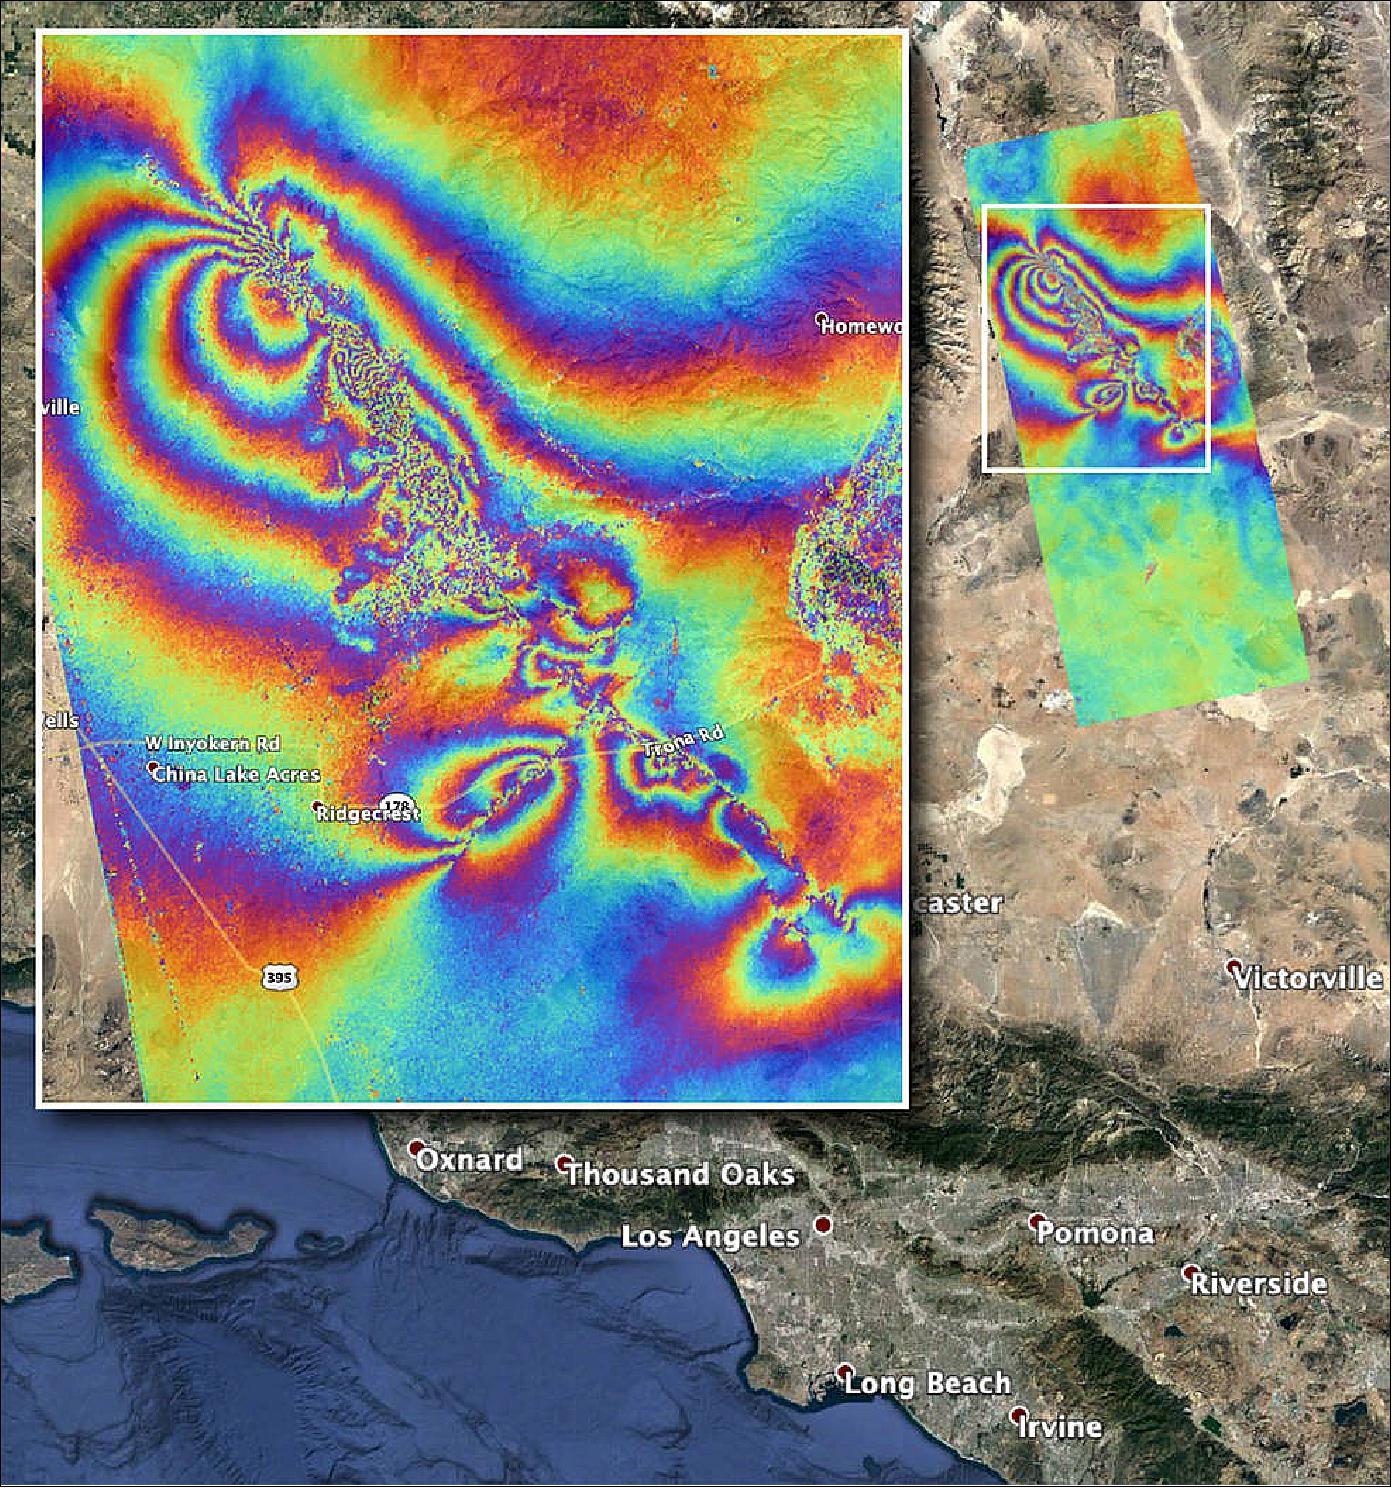 Figure 22: NASA's Advanced Rapid Imaging and Analysis (ARIA) team created this co-seismic Interferometric Synthetic Aperture Radar (InSAR) map, which shows surface displacement caused by the recent major earthquakes in Southern California, including the magnitude 6.4 and the magnitude 7.1 events on July 4 and July 5, 2019, respectively. The interferogram is derived from synthetic aperture radar (SAR) images from the ALOS-2 satellite, operated by JAXA (Japan Aerospace Exploration Agency). The images were taken before (April 16, 2018) and after (July 8, 2019) the sequence of earthquakes. - The image covers an area of 50 x 125 km, and each pixel measures about 90 m across. No filter was applied during the processing. The linear features across which the color fringes break indicate likely locations of surface rupture caused by the earthquakes, and the "noisy" areas may indicate locations where ground surface was disturbed by the earthquakes (image credit: NASA/JPL-Caltech)